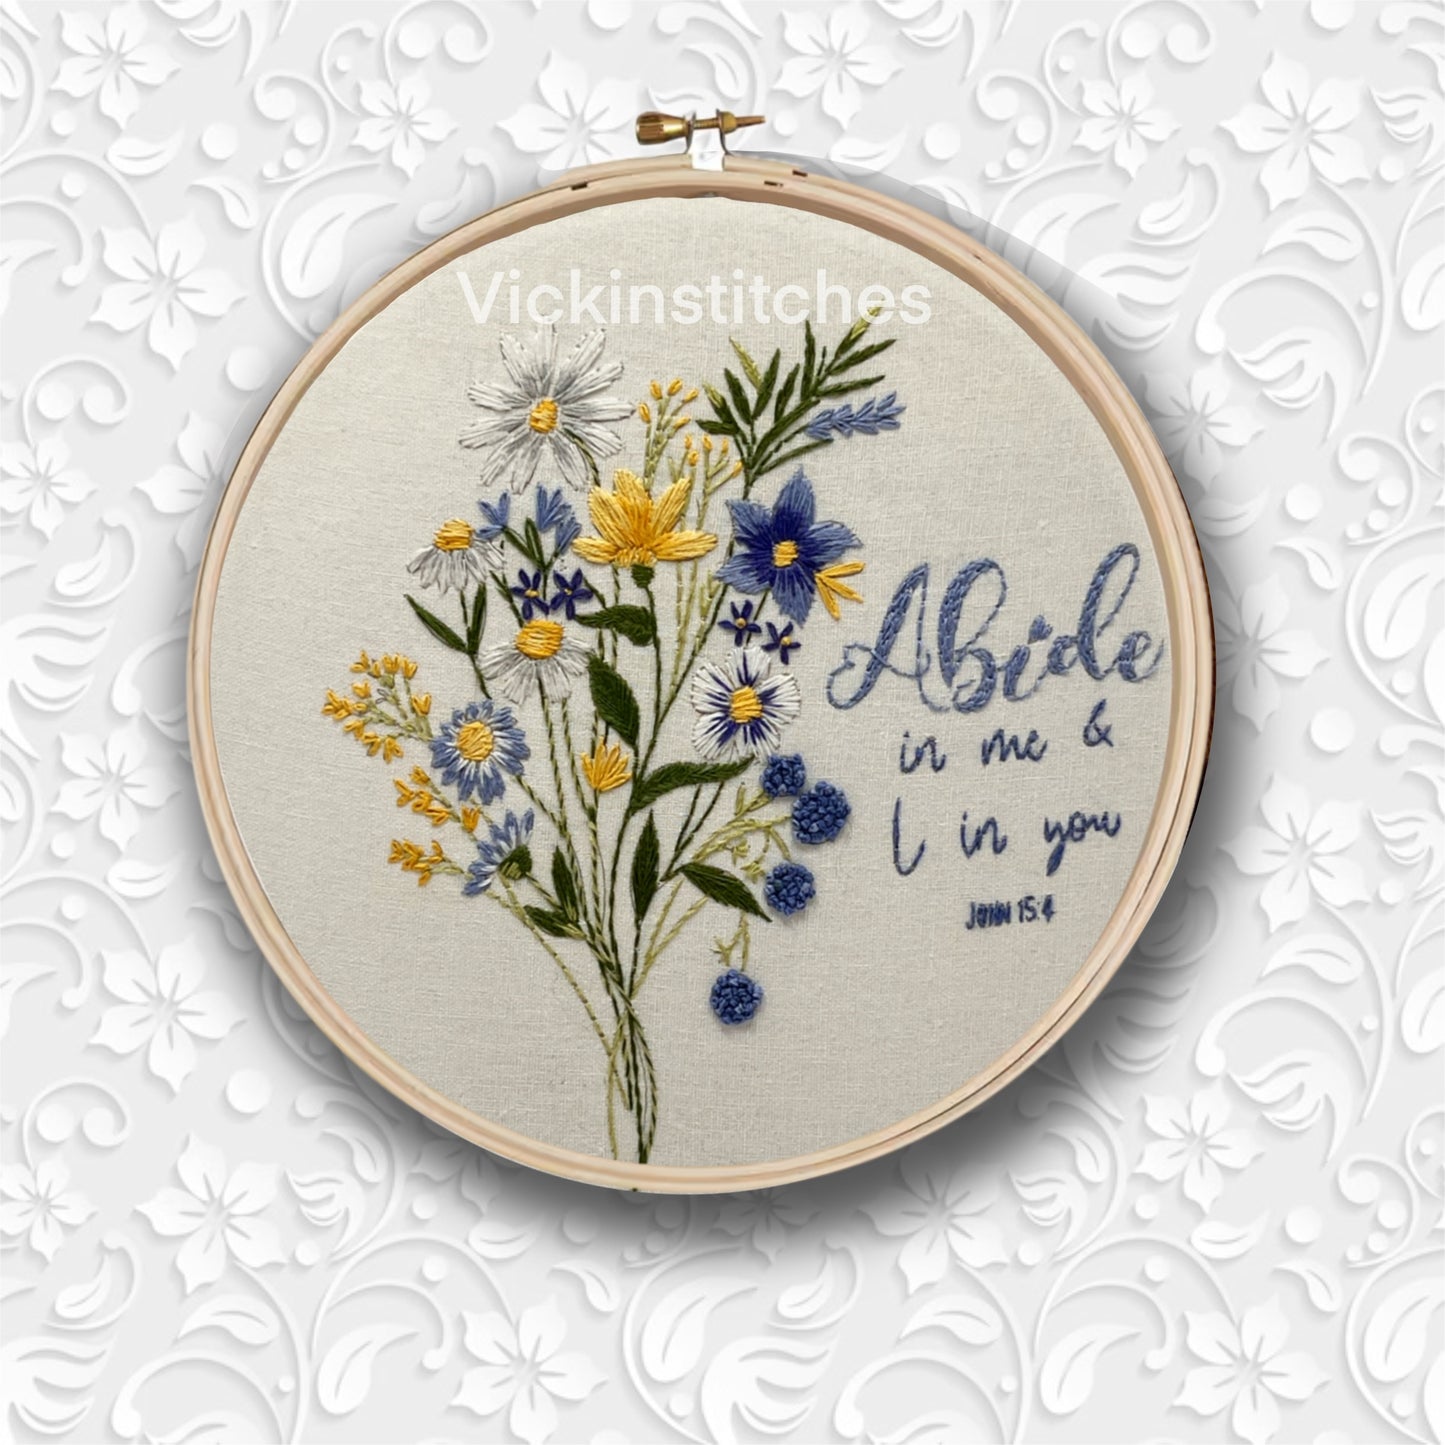 Wildflower daisy hand Embroidery kit for beginners . Christian hand embroidery decor . Craft kit . Complete embroidery kit yellow white blue